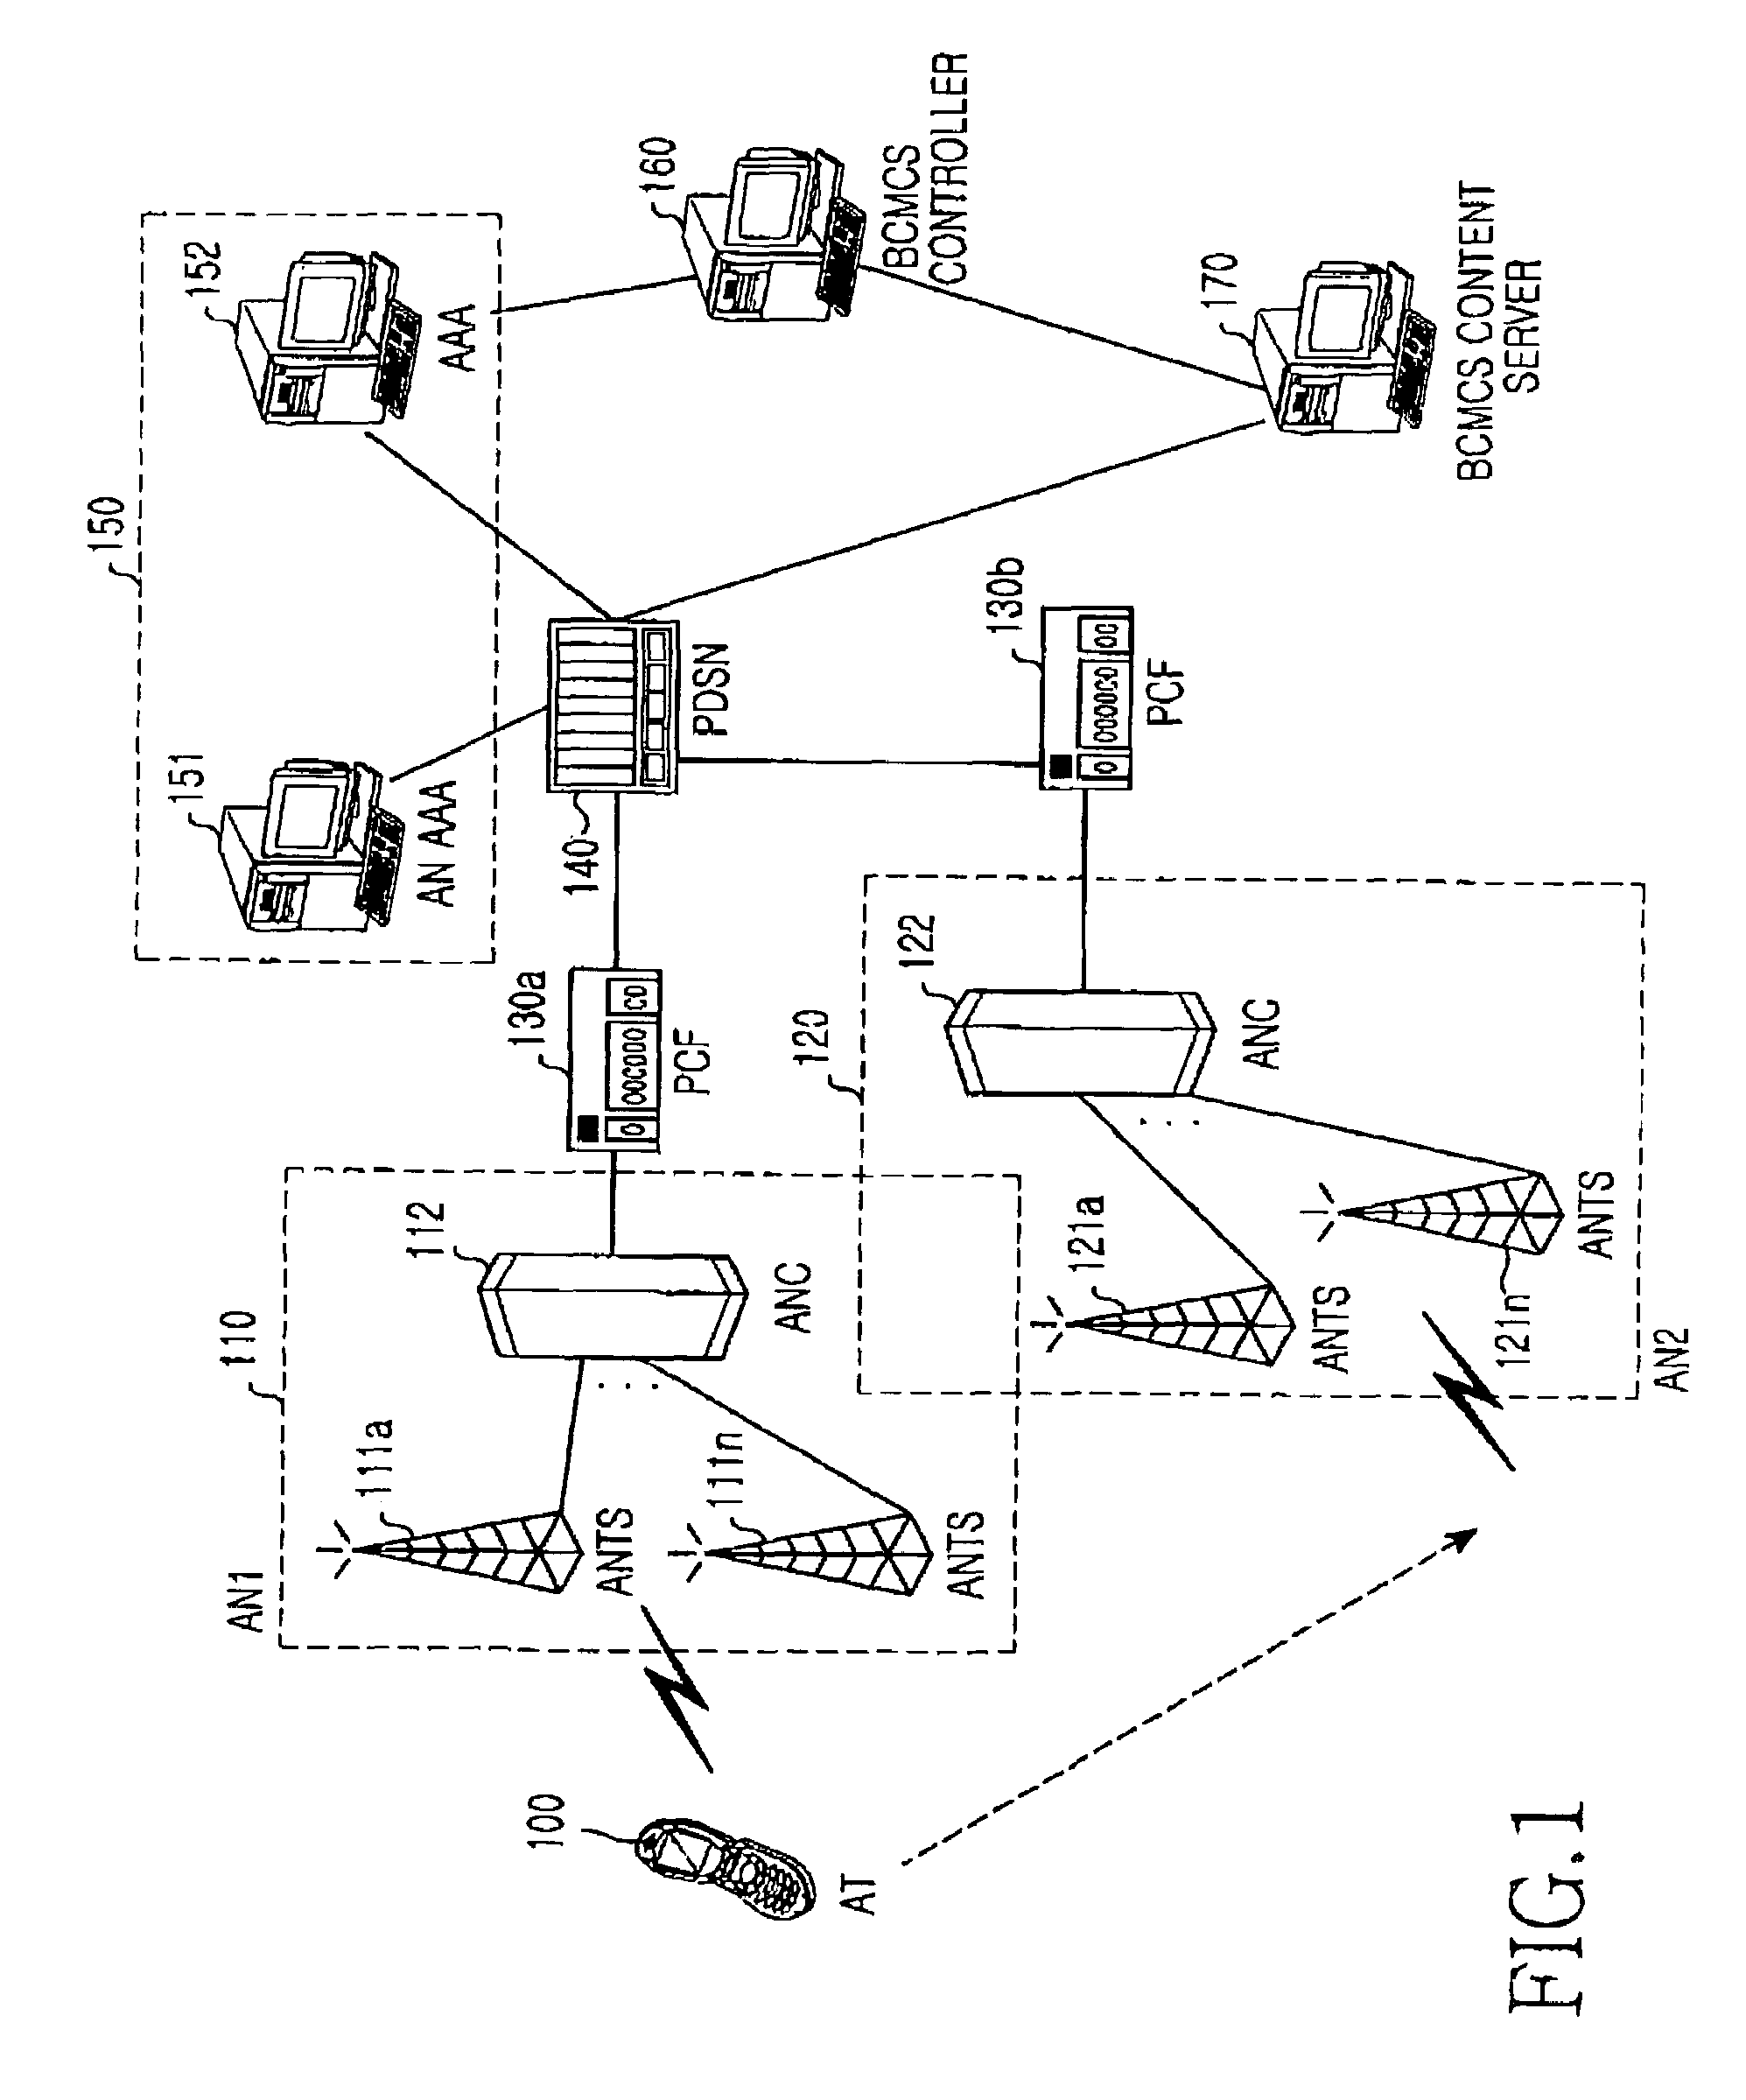 System and method for synchronizing broadcast/multicast service content frames in a mobile communication system